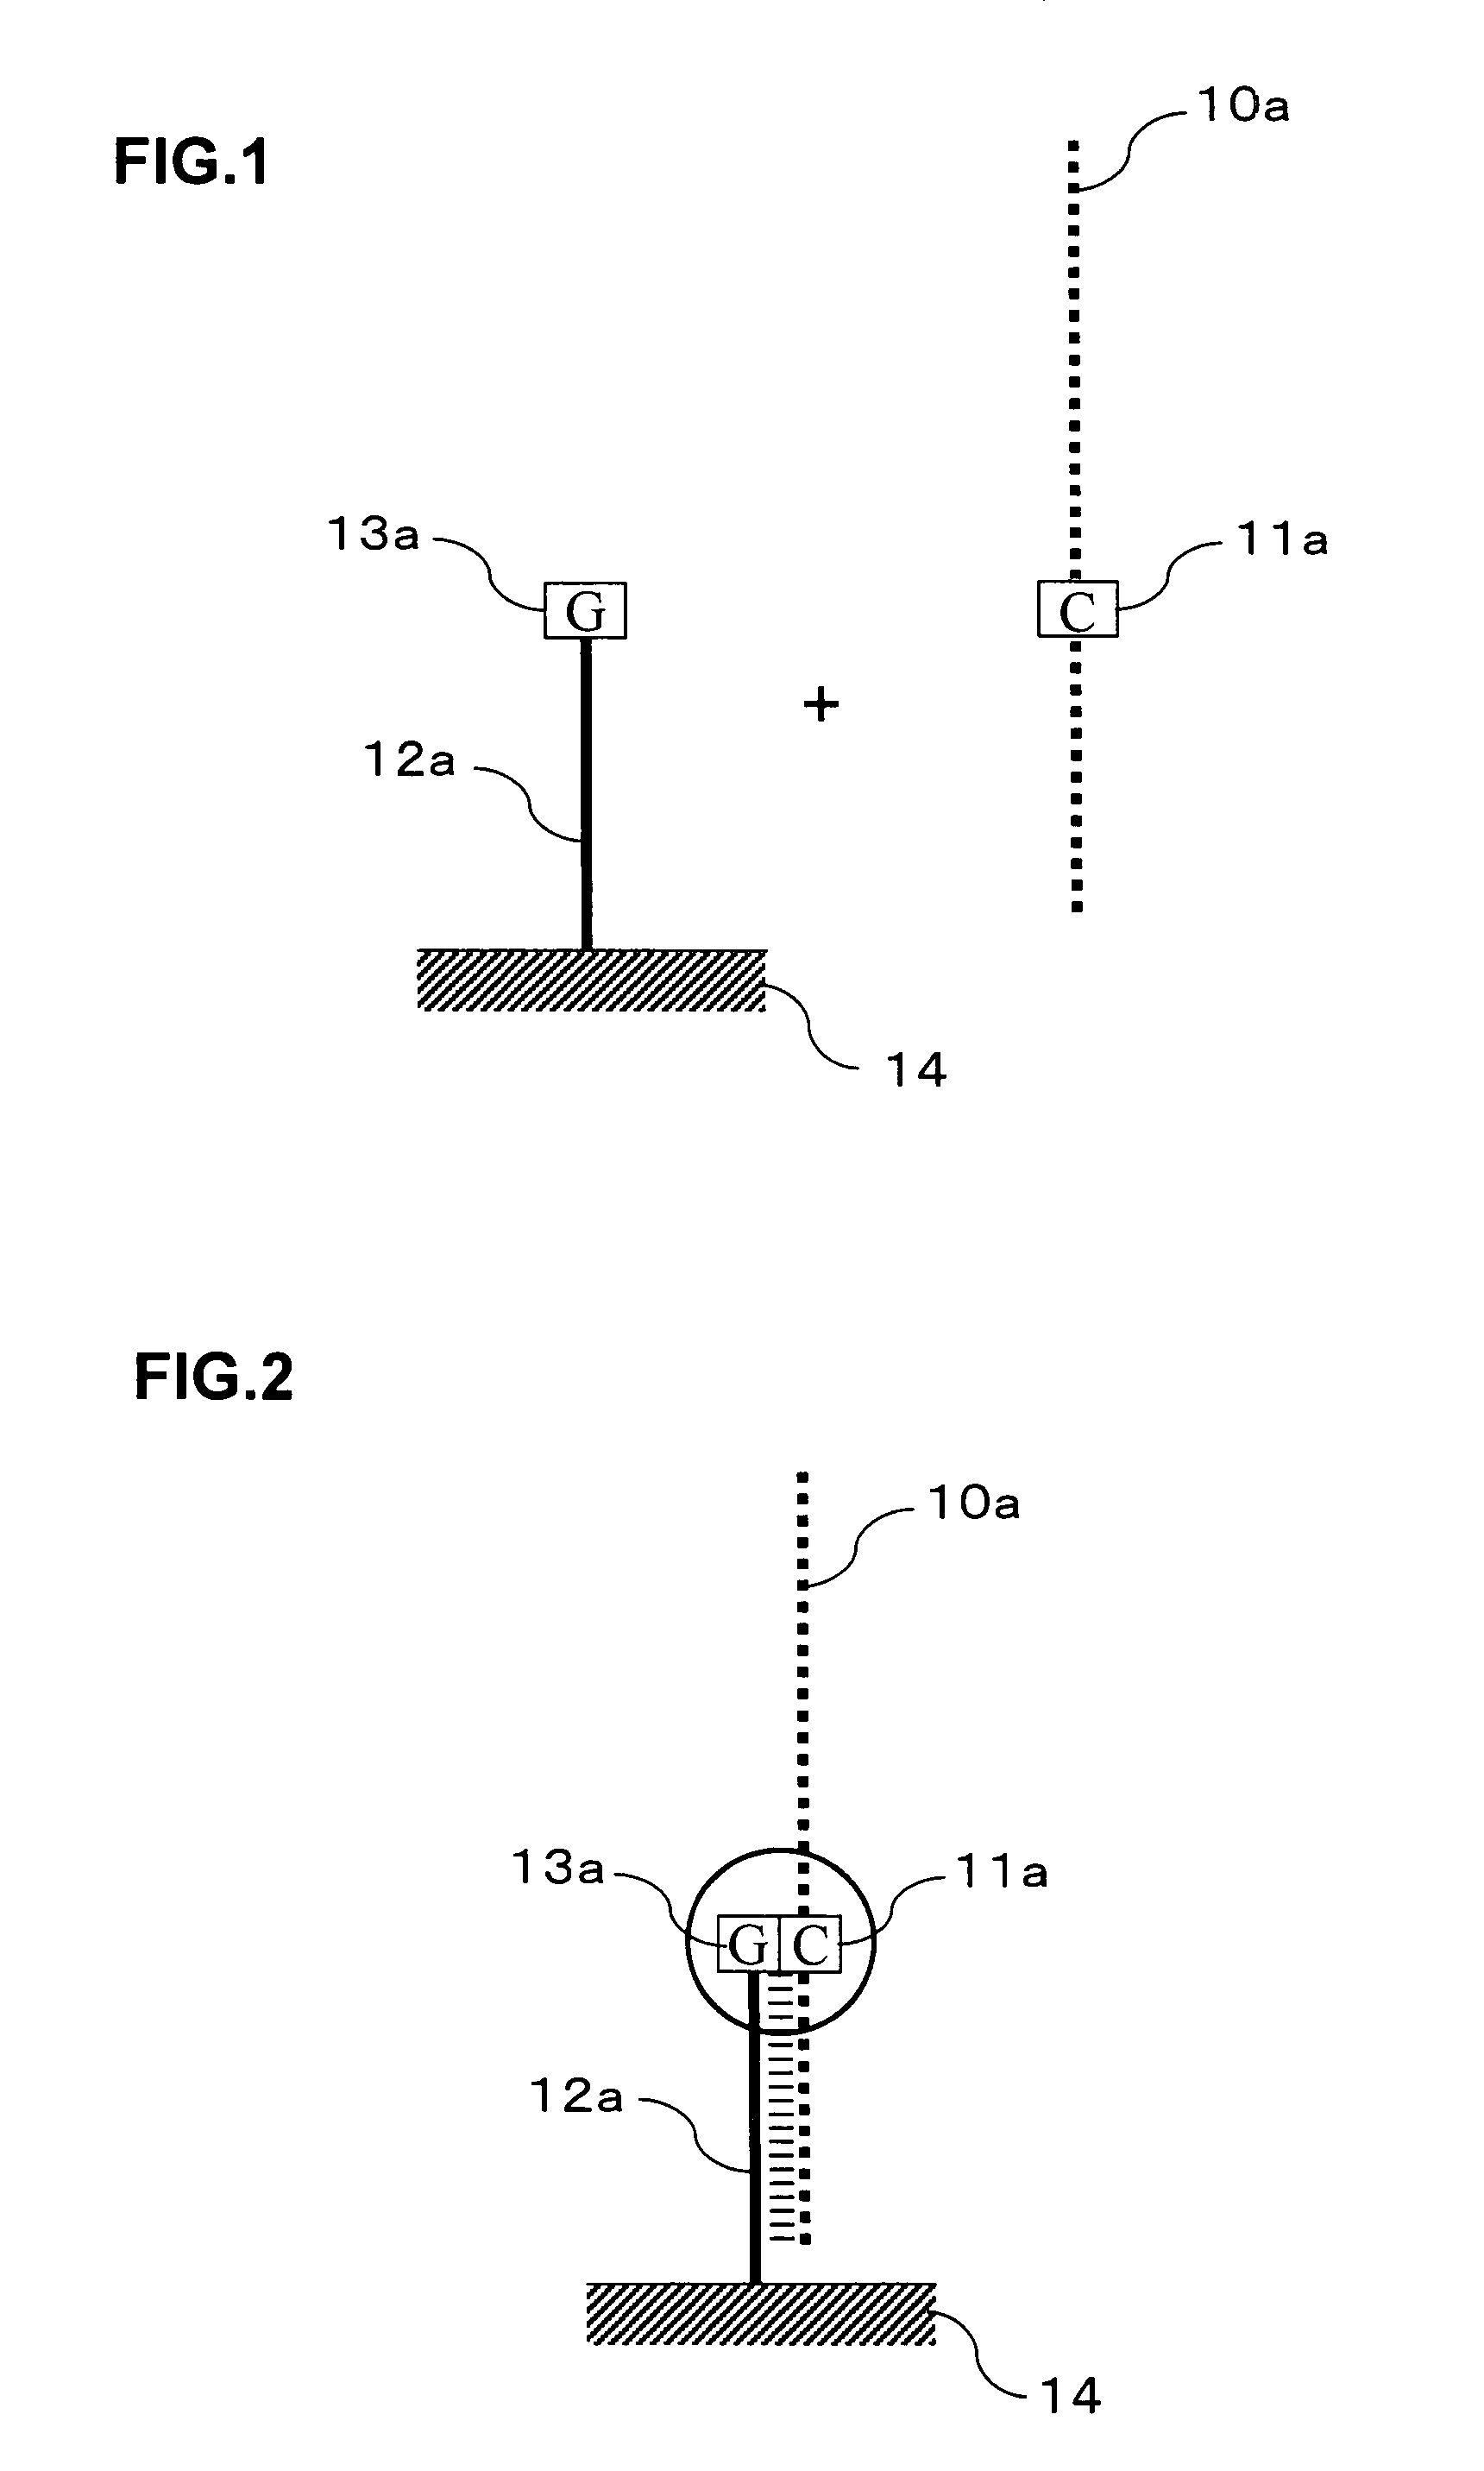 Signal amplification method for detecting mutated gene